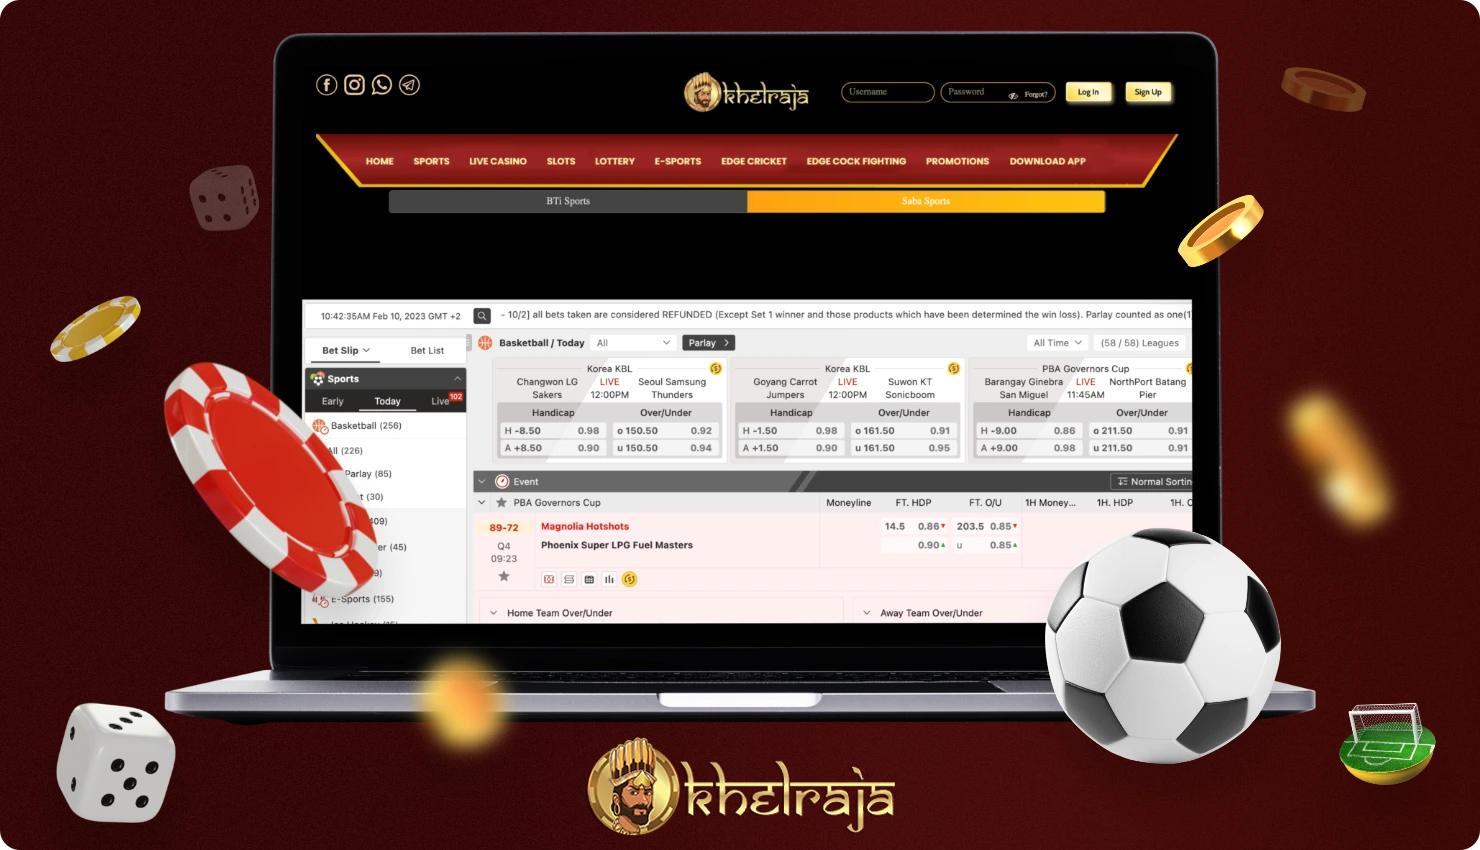 Detailed information about Khelraja for legal sports betting and casinos in India